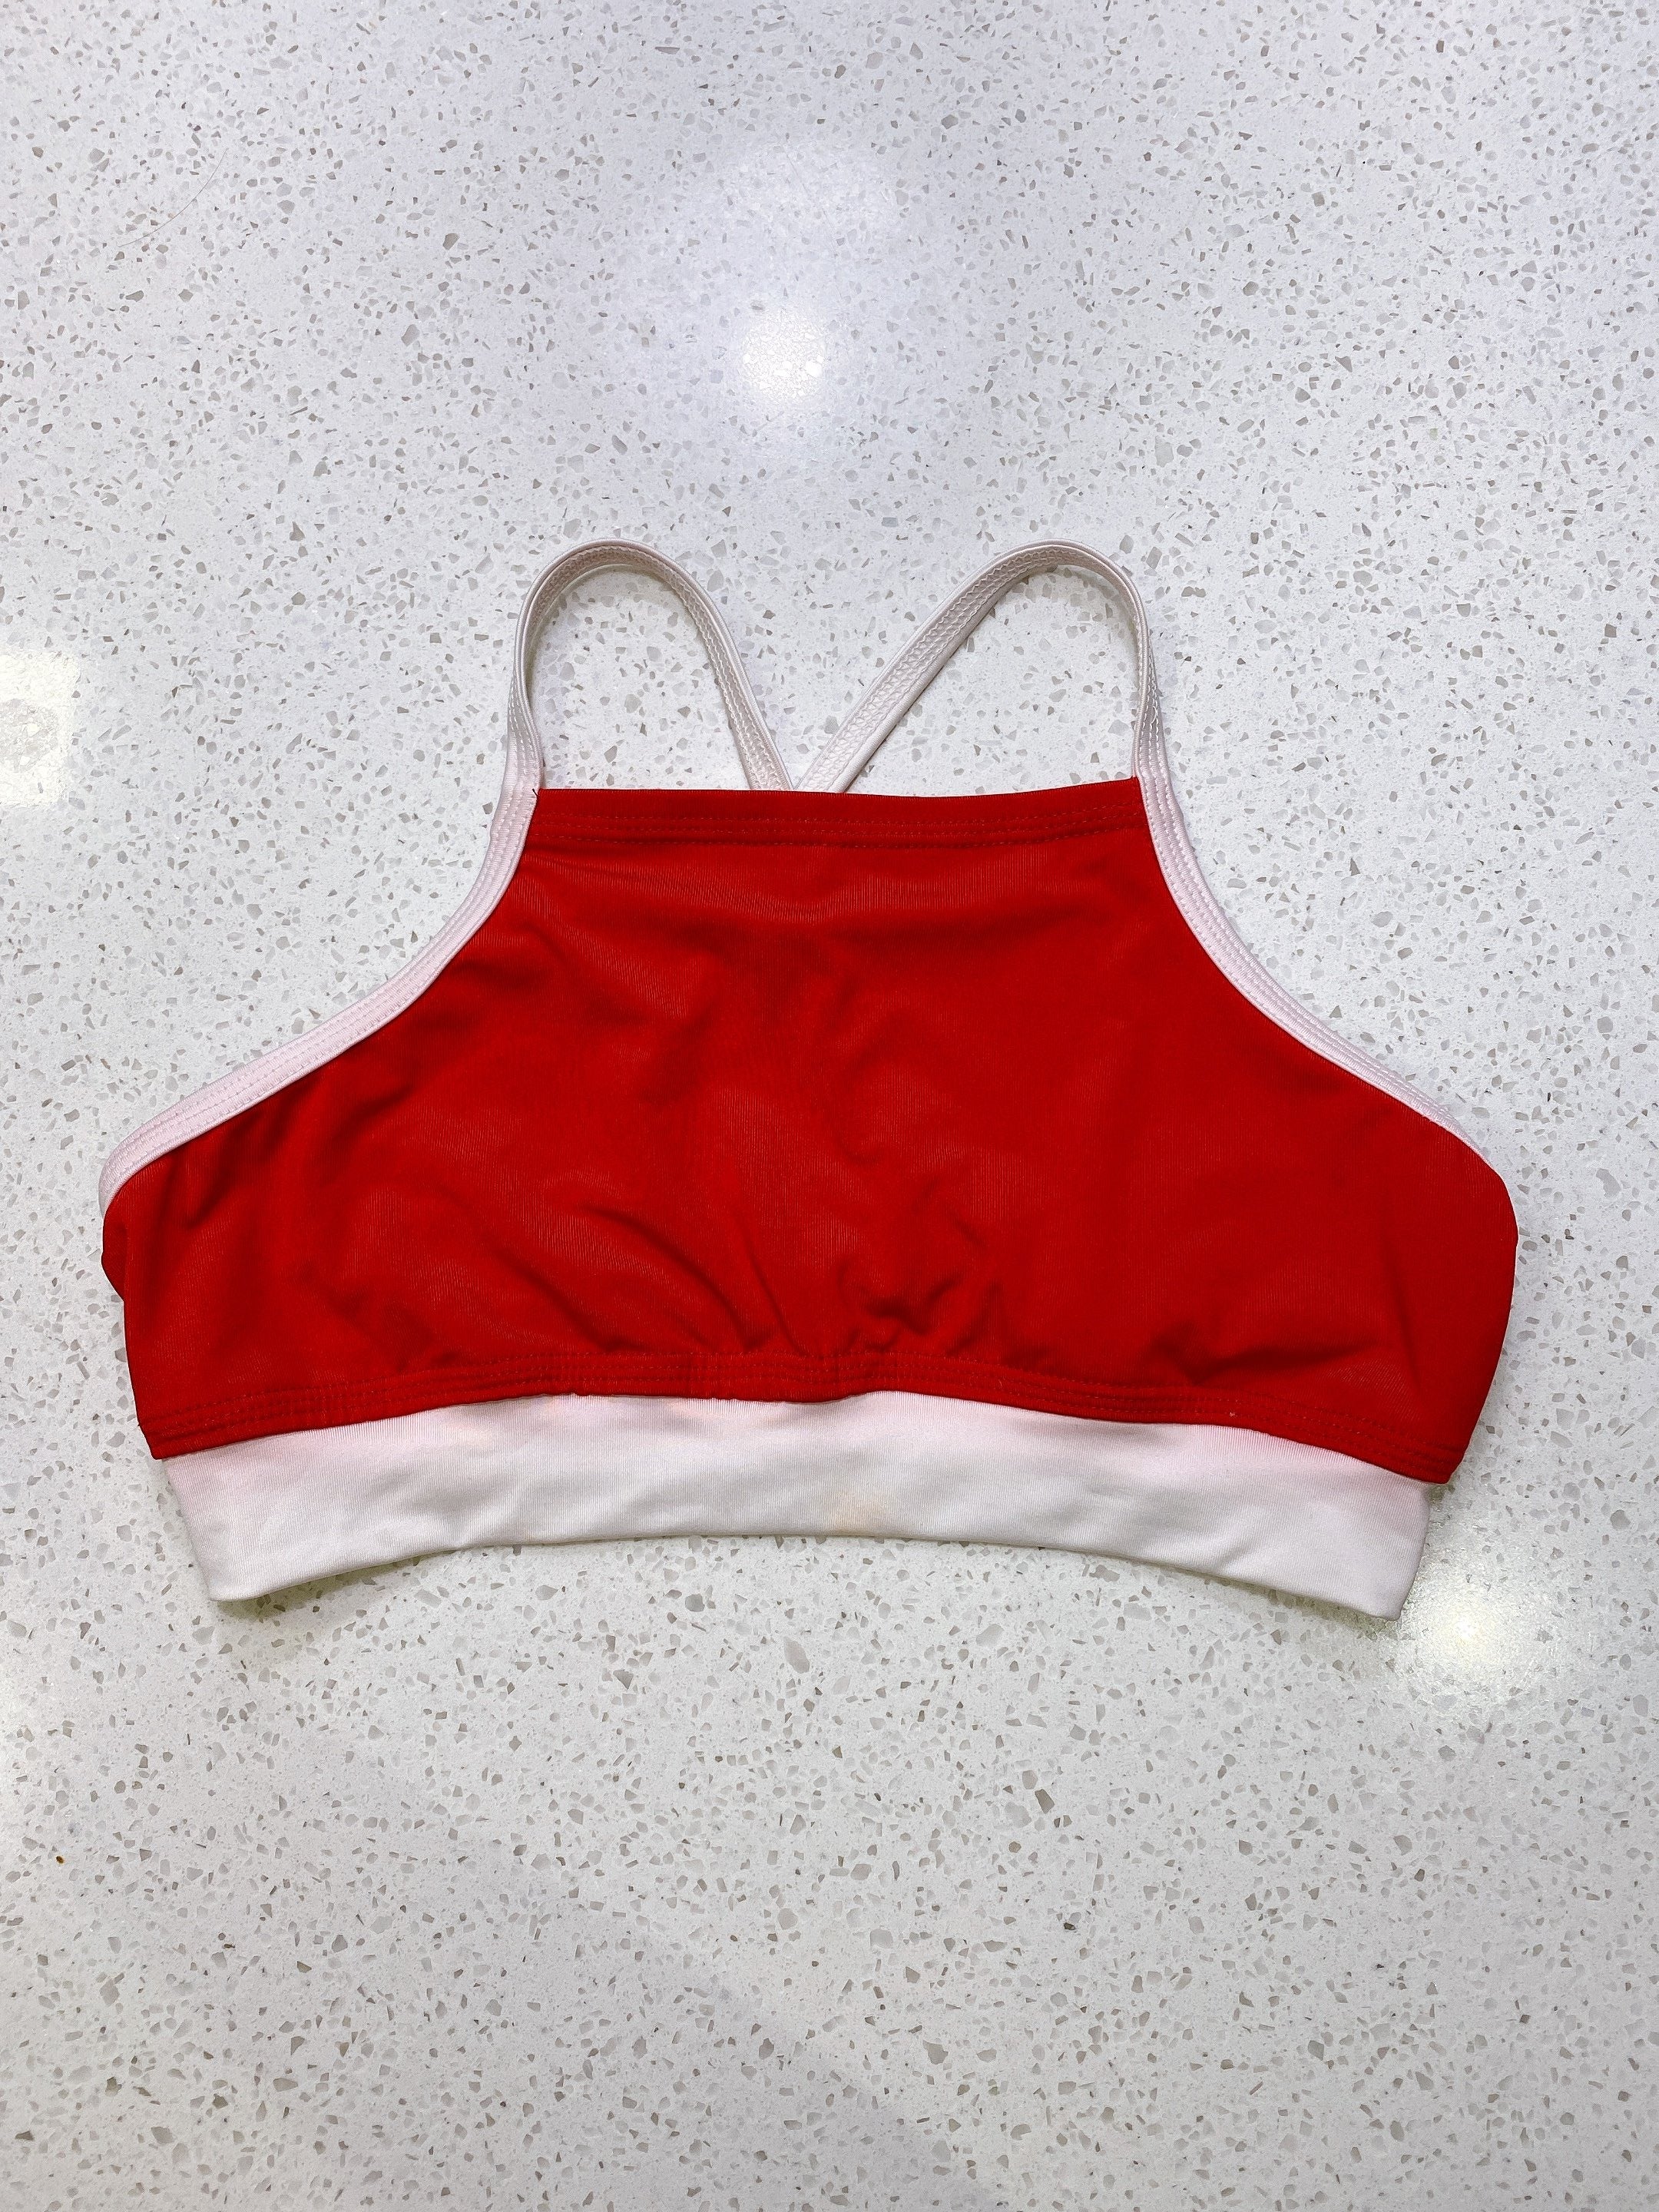 SAMPLE SALE: RED SPORTY TOP WITH WHITE ACCENT